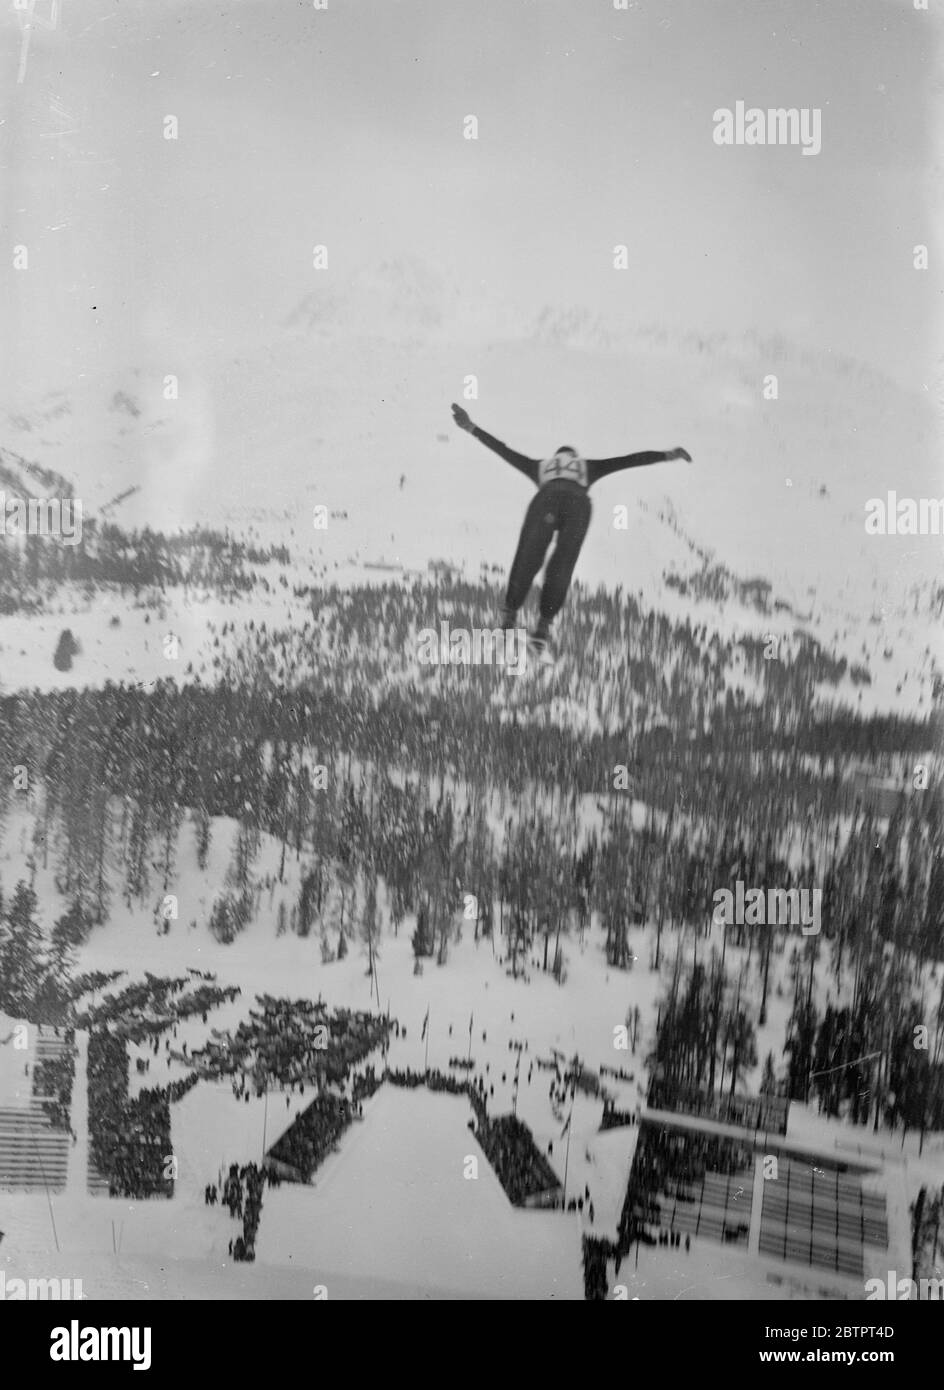 Ski jump through the skies. Buhler Richard, the Swiss champion, appears to hover over the snow covered landscape as he makes a spec track your ski jump at St Moritz, the Swiss resort. 31 December 1937 Stock Photo